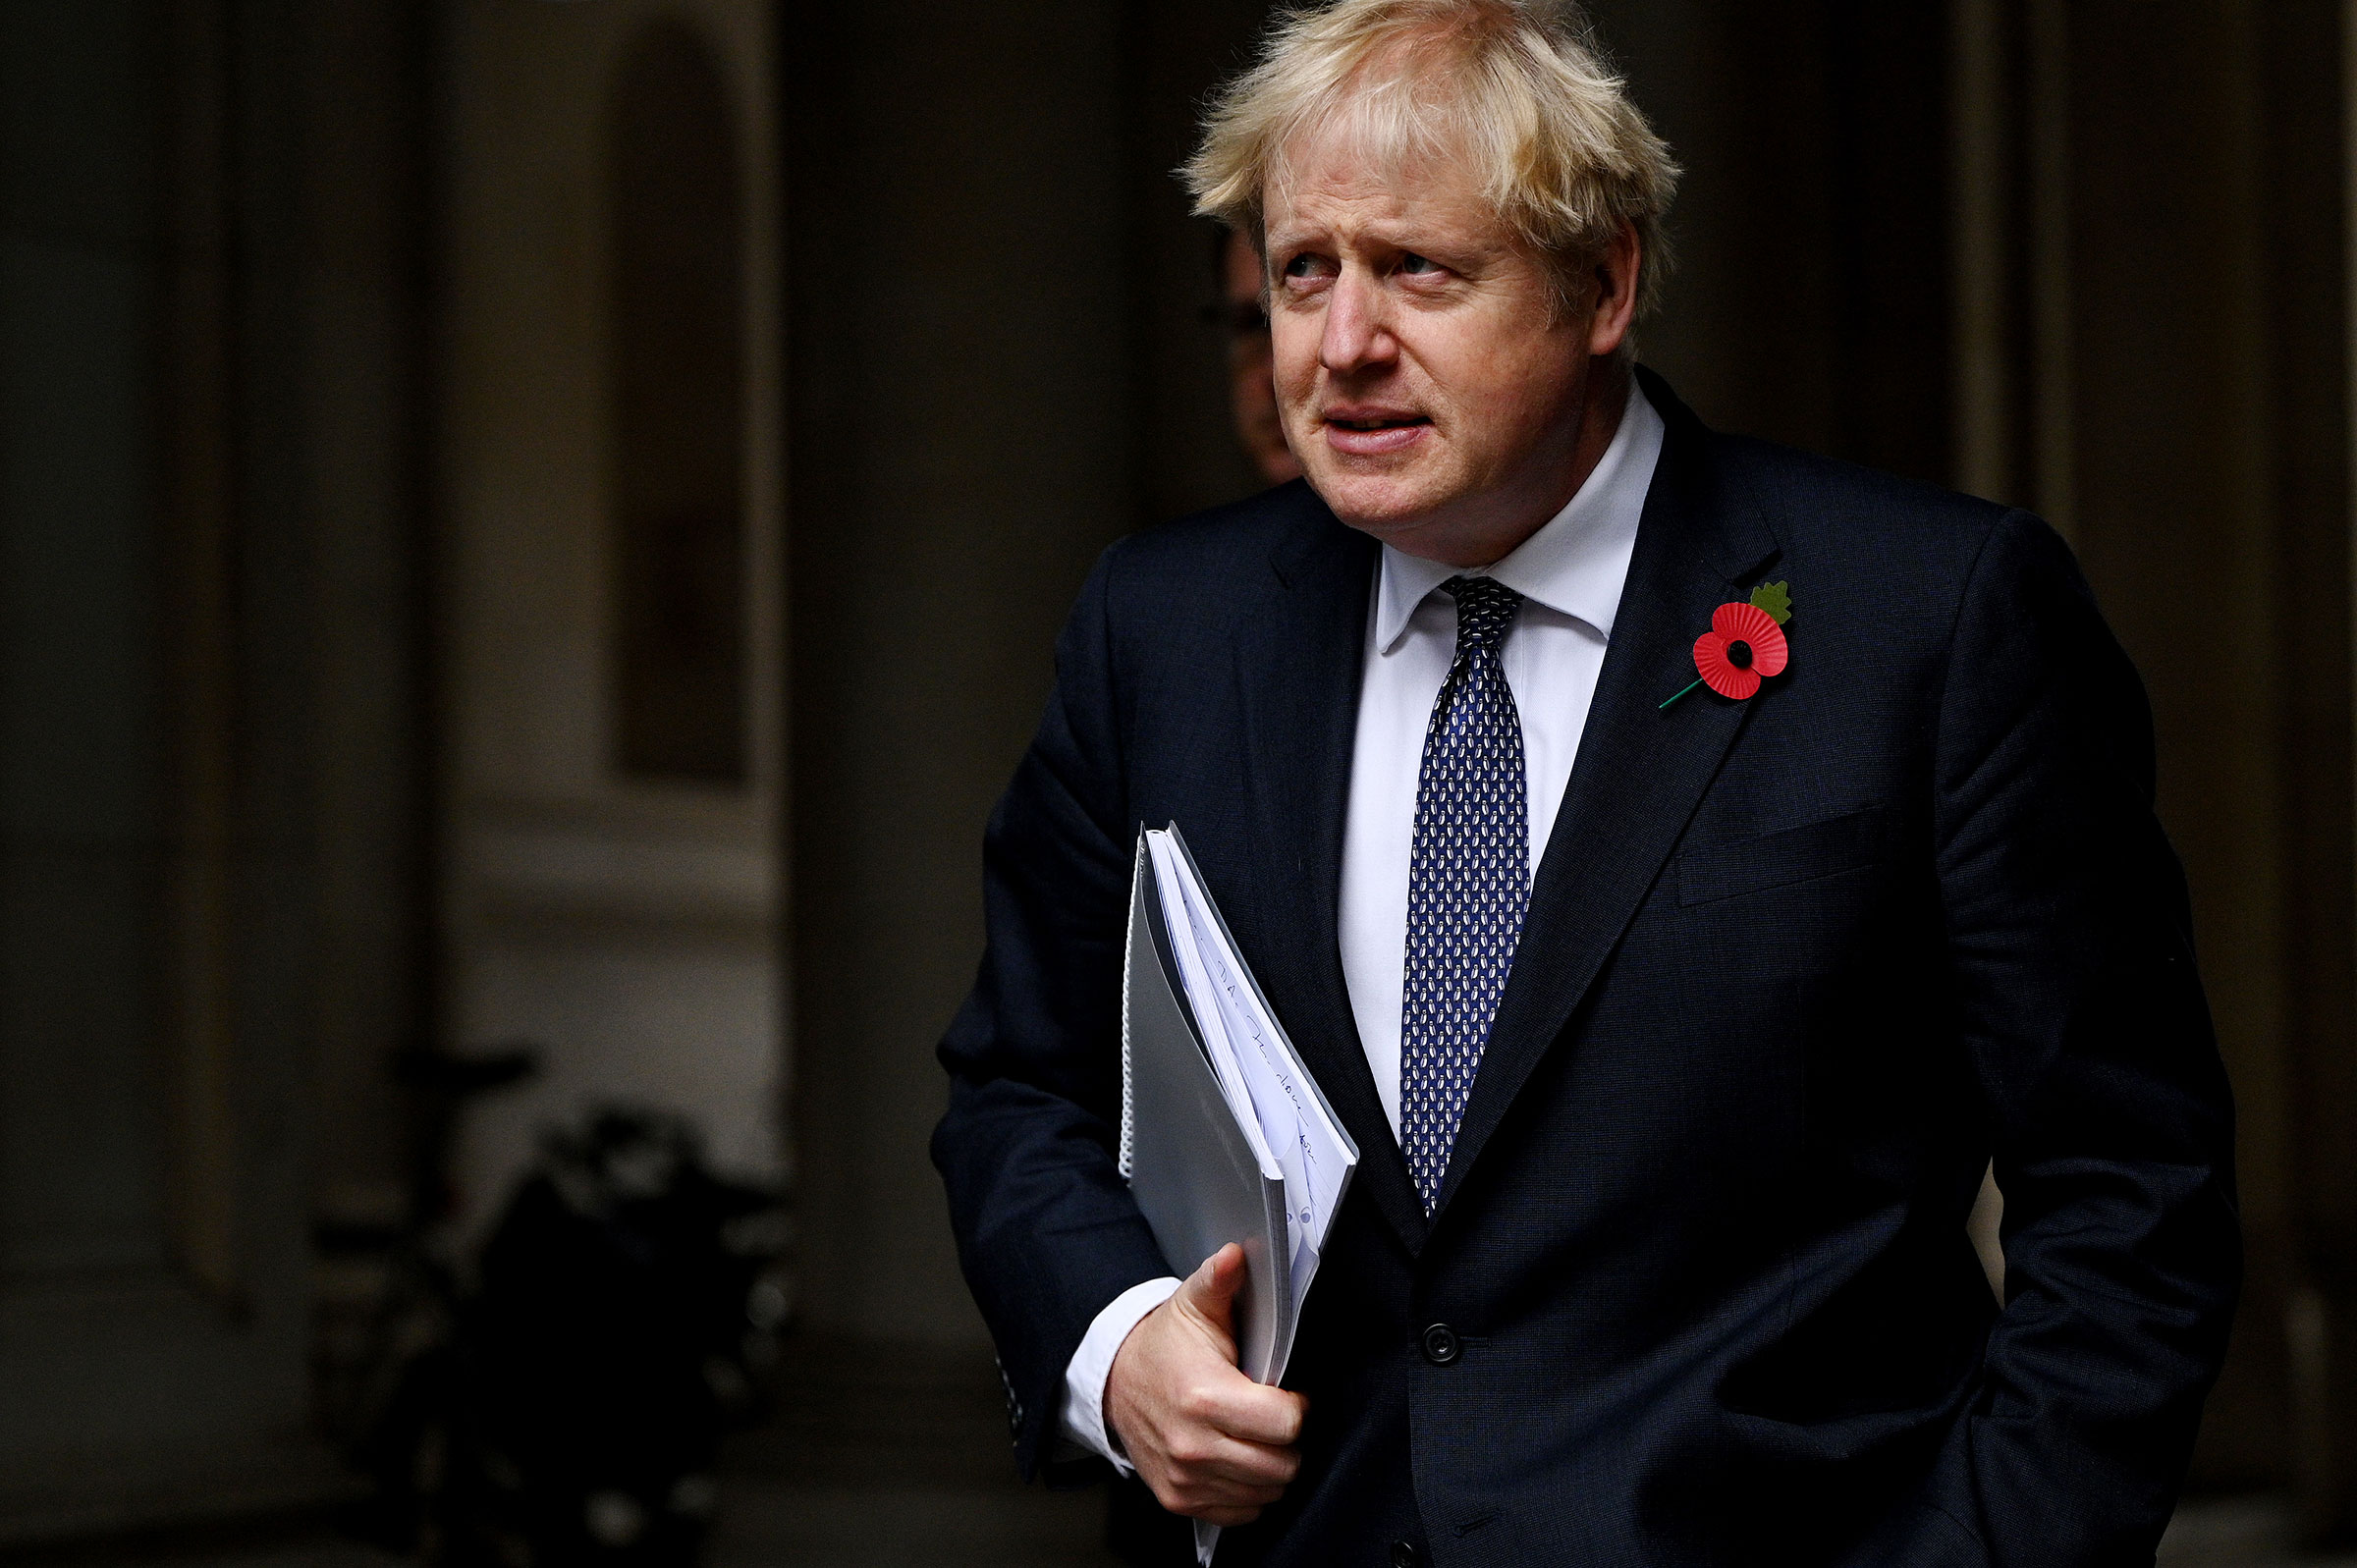 Britain's Prime Minister Boris Johnson returns to number 10, Downing Street following the weekly Cabinet meeting at the Foreign Office in London, on Nov. 10, 2020. (Leon Neal—Getty Images)